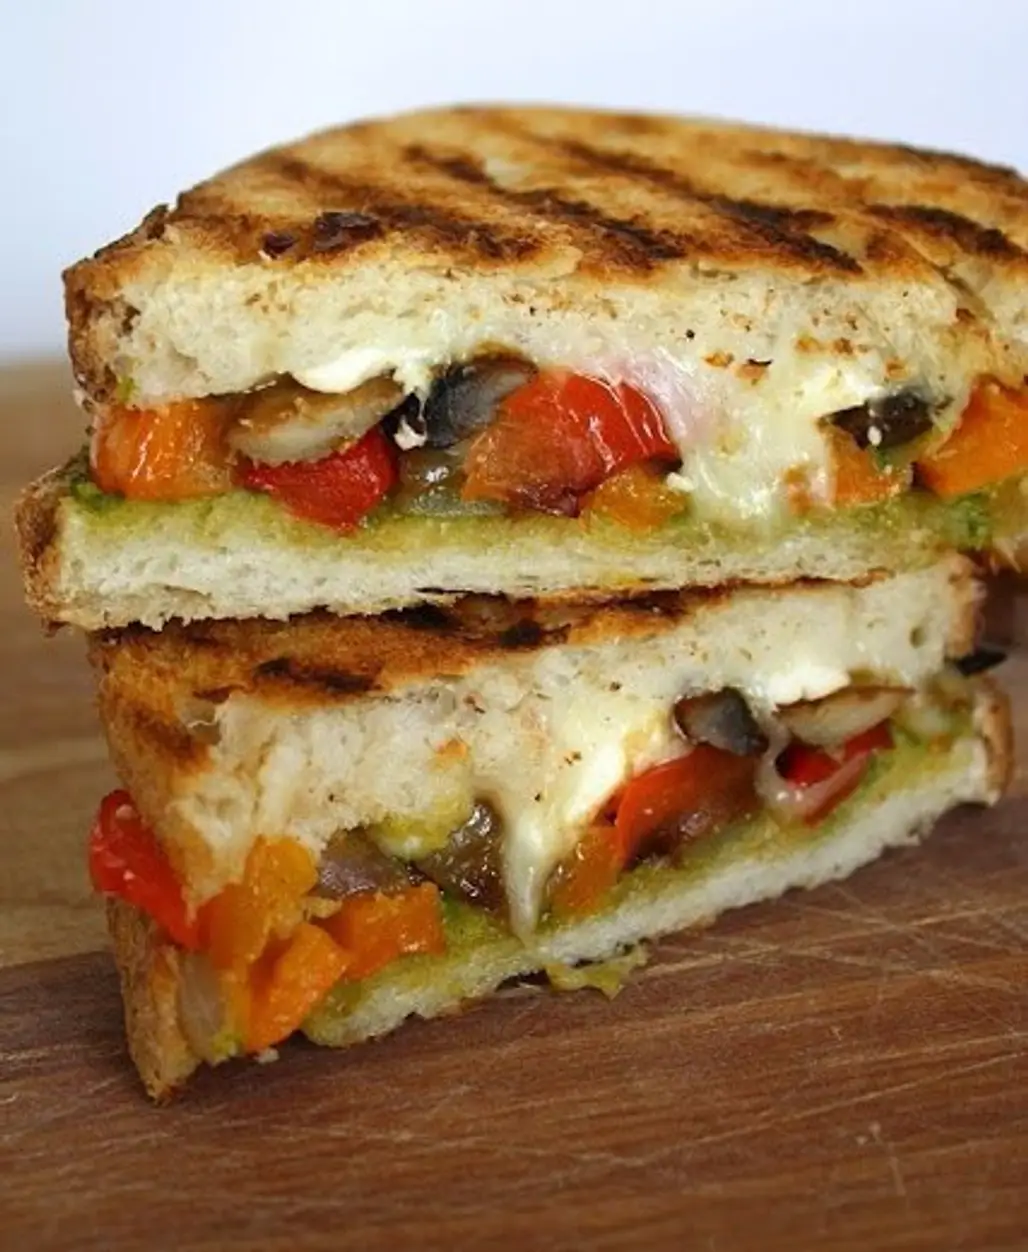 A Roasted Vegetable Panini with Pesto Will Get Your Mouth Watering